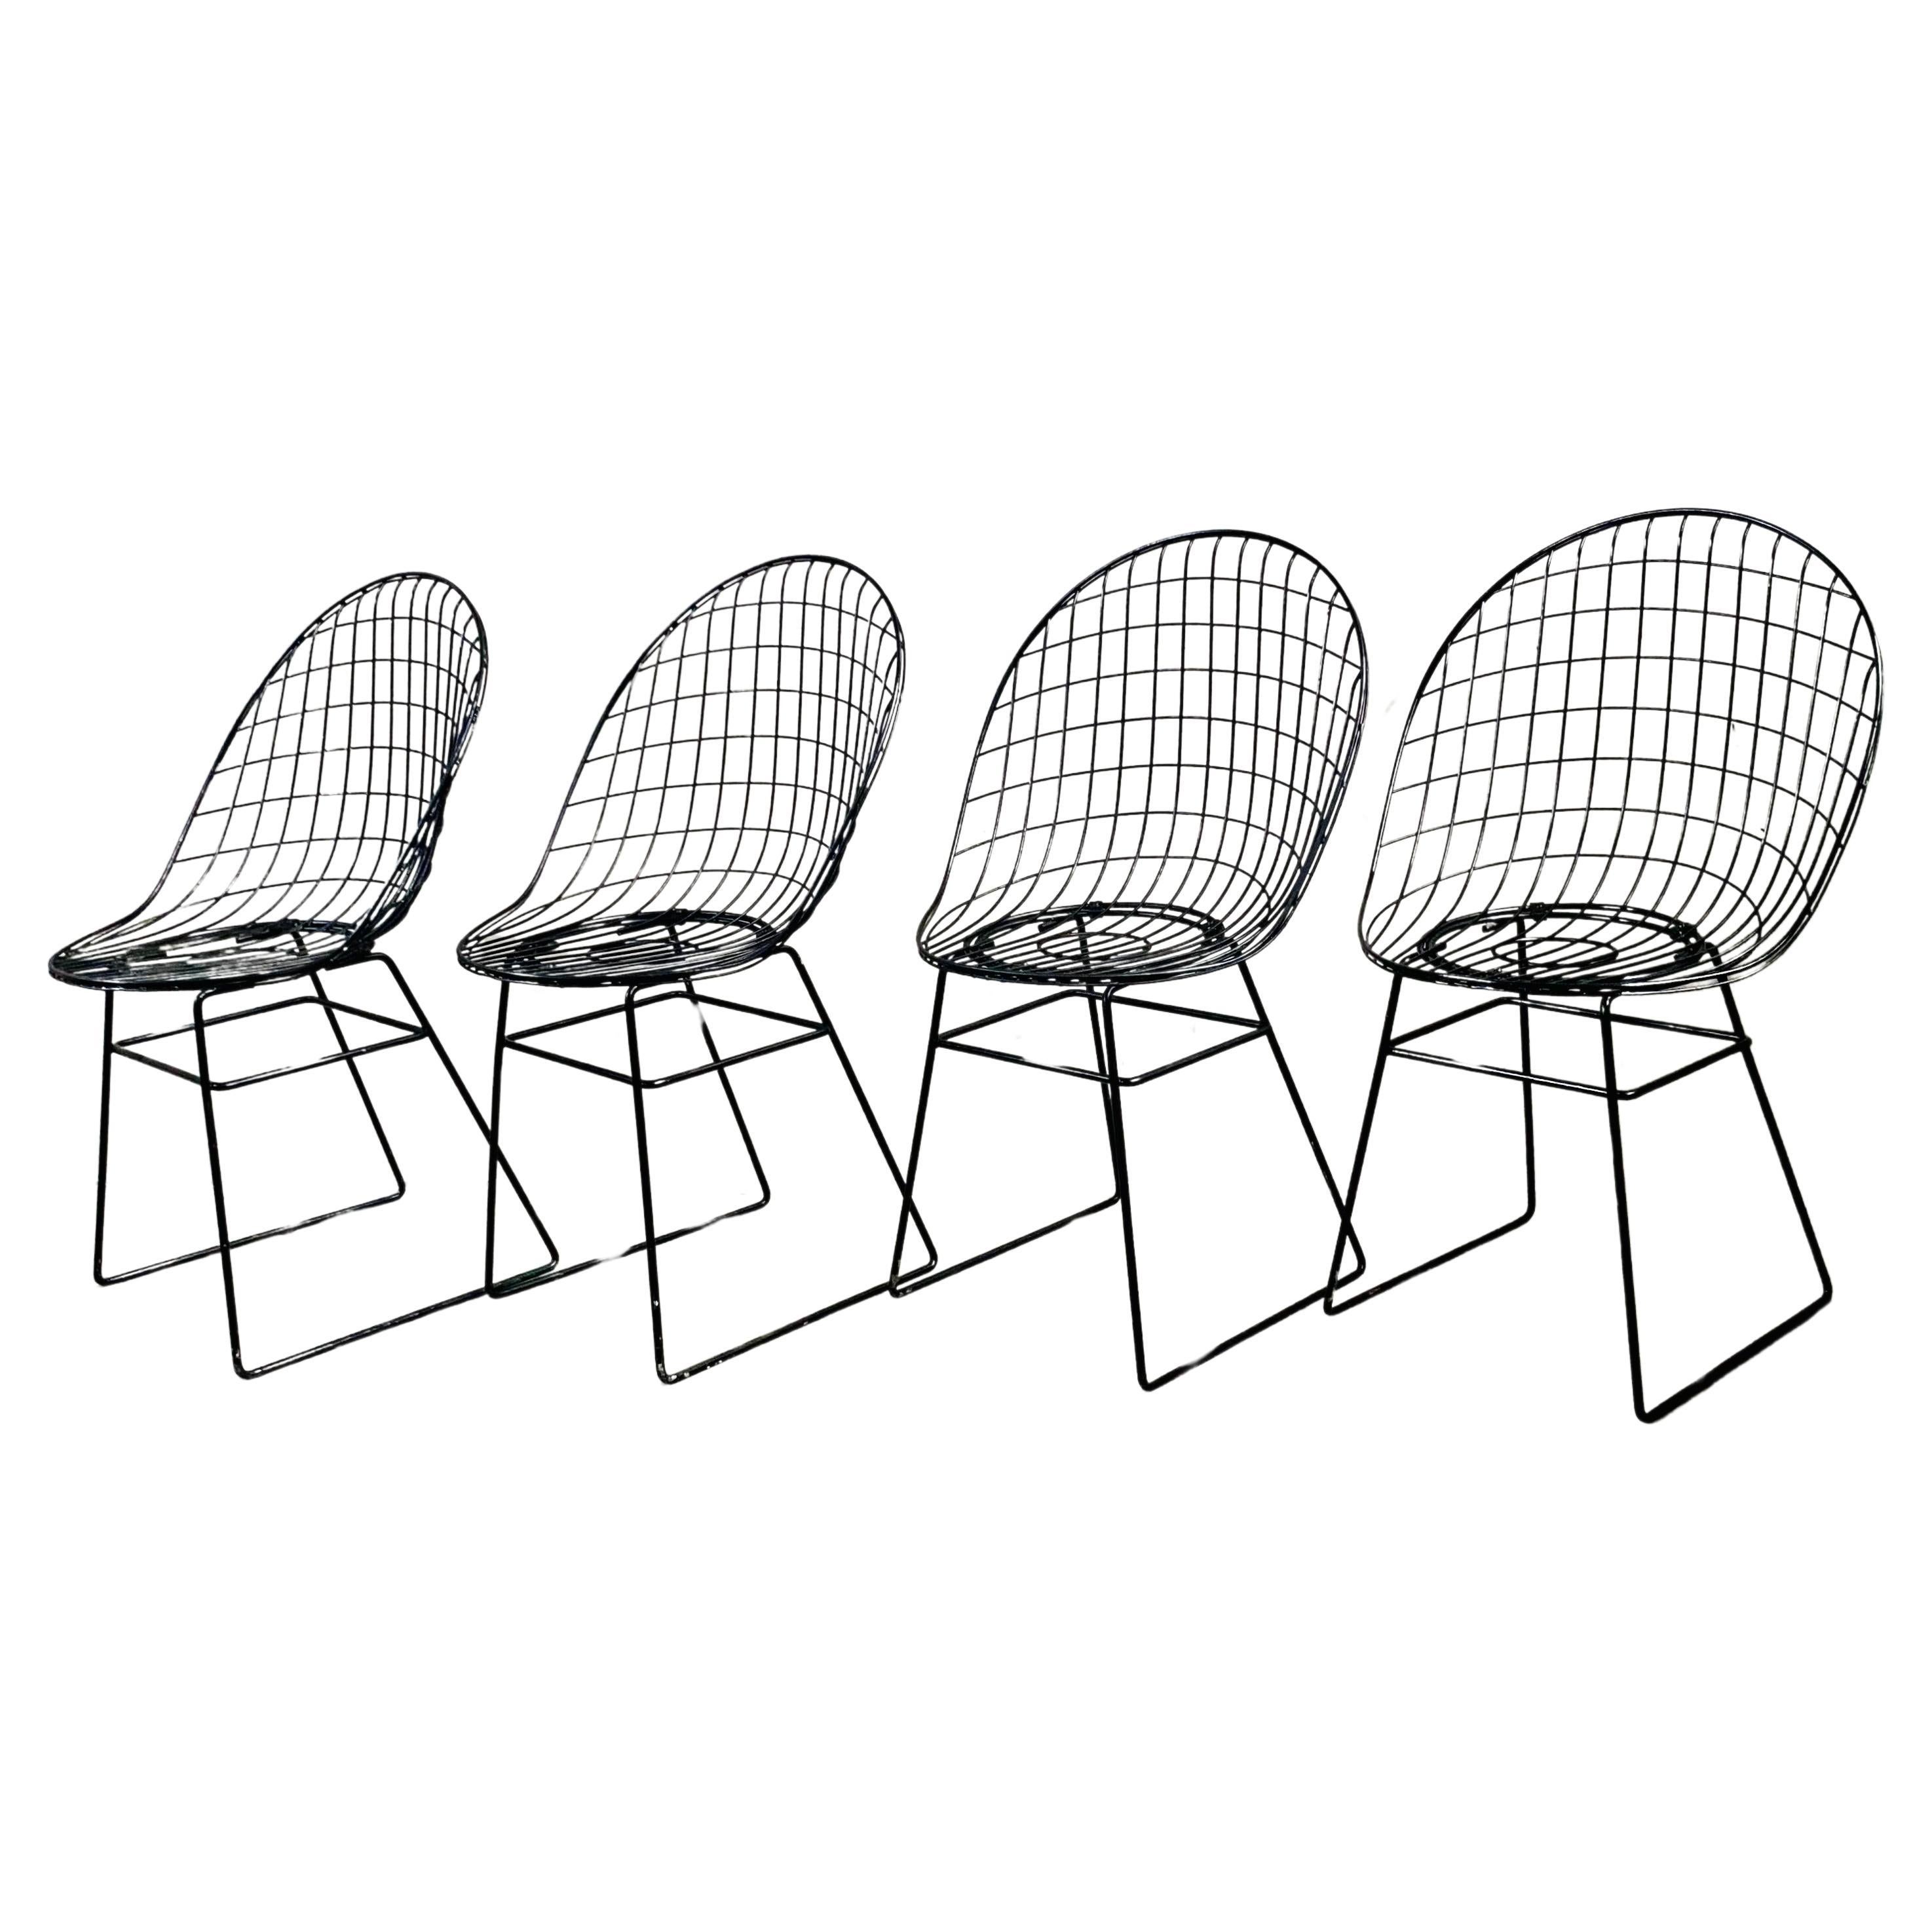 4 Early Edition Wire Chairs by Cees Braakman & A. Dekker for UMS Pastoe, 1950 For Sale